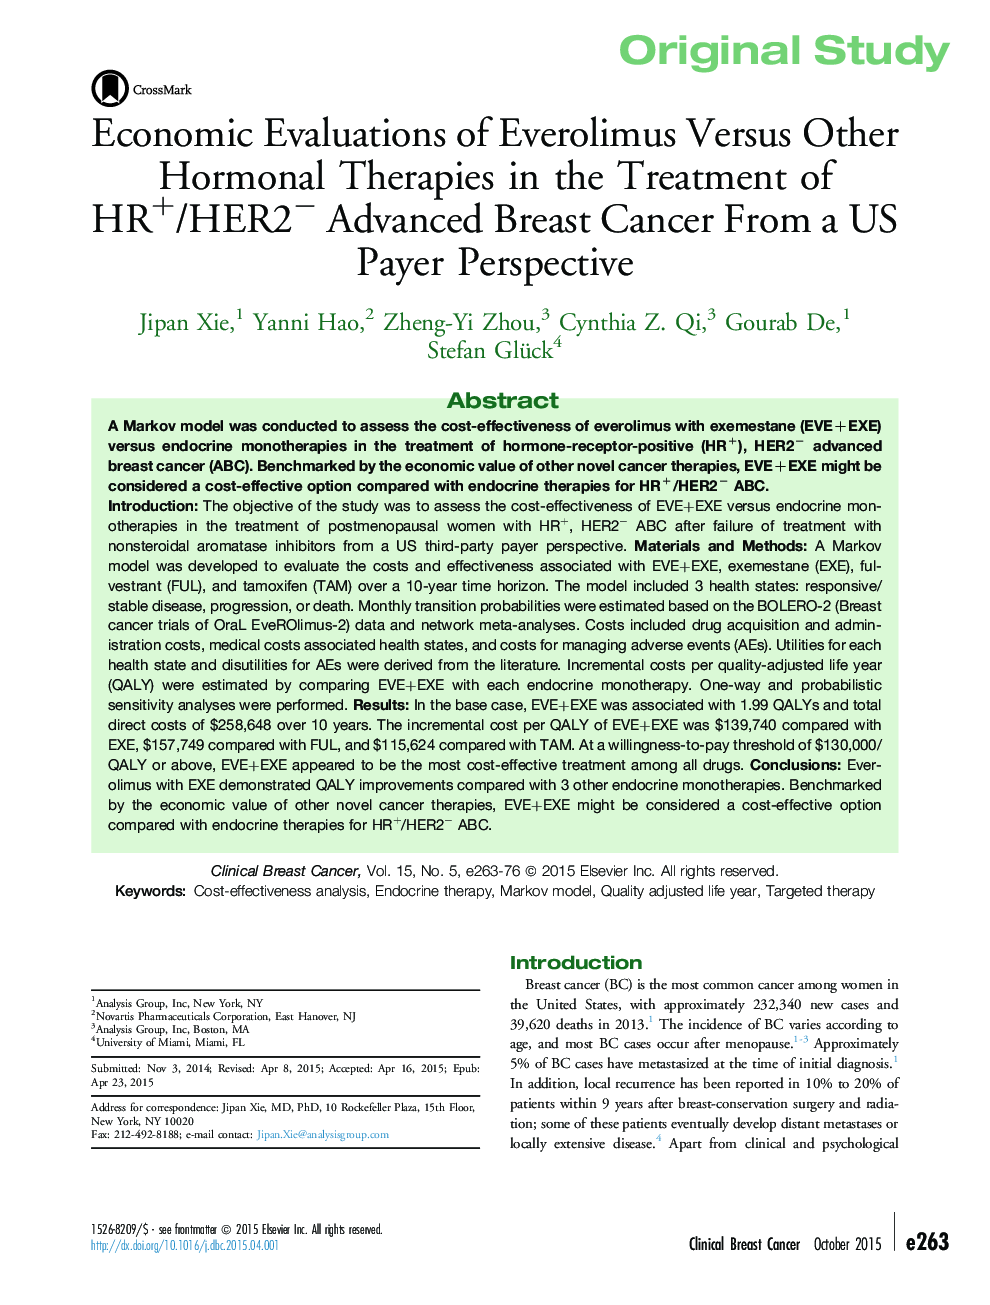 Economic Evaluations of Everolimus Versus Other Hormonal Therapies in the Treatment of HR+/HER2â Advanced Breast Cancer From a US Payer Perspective